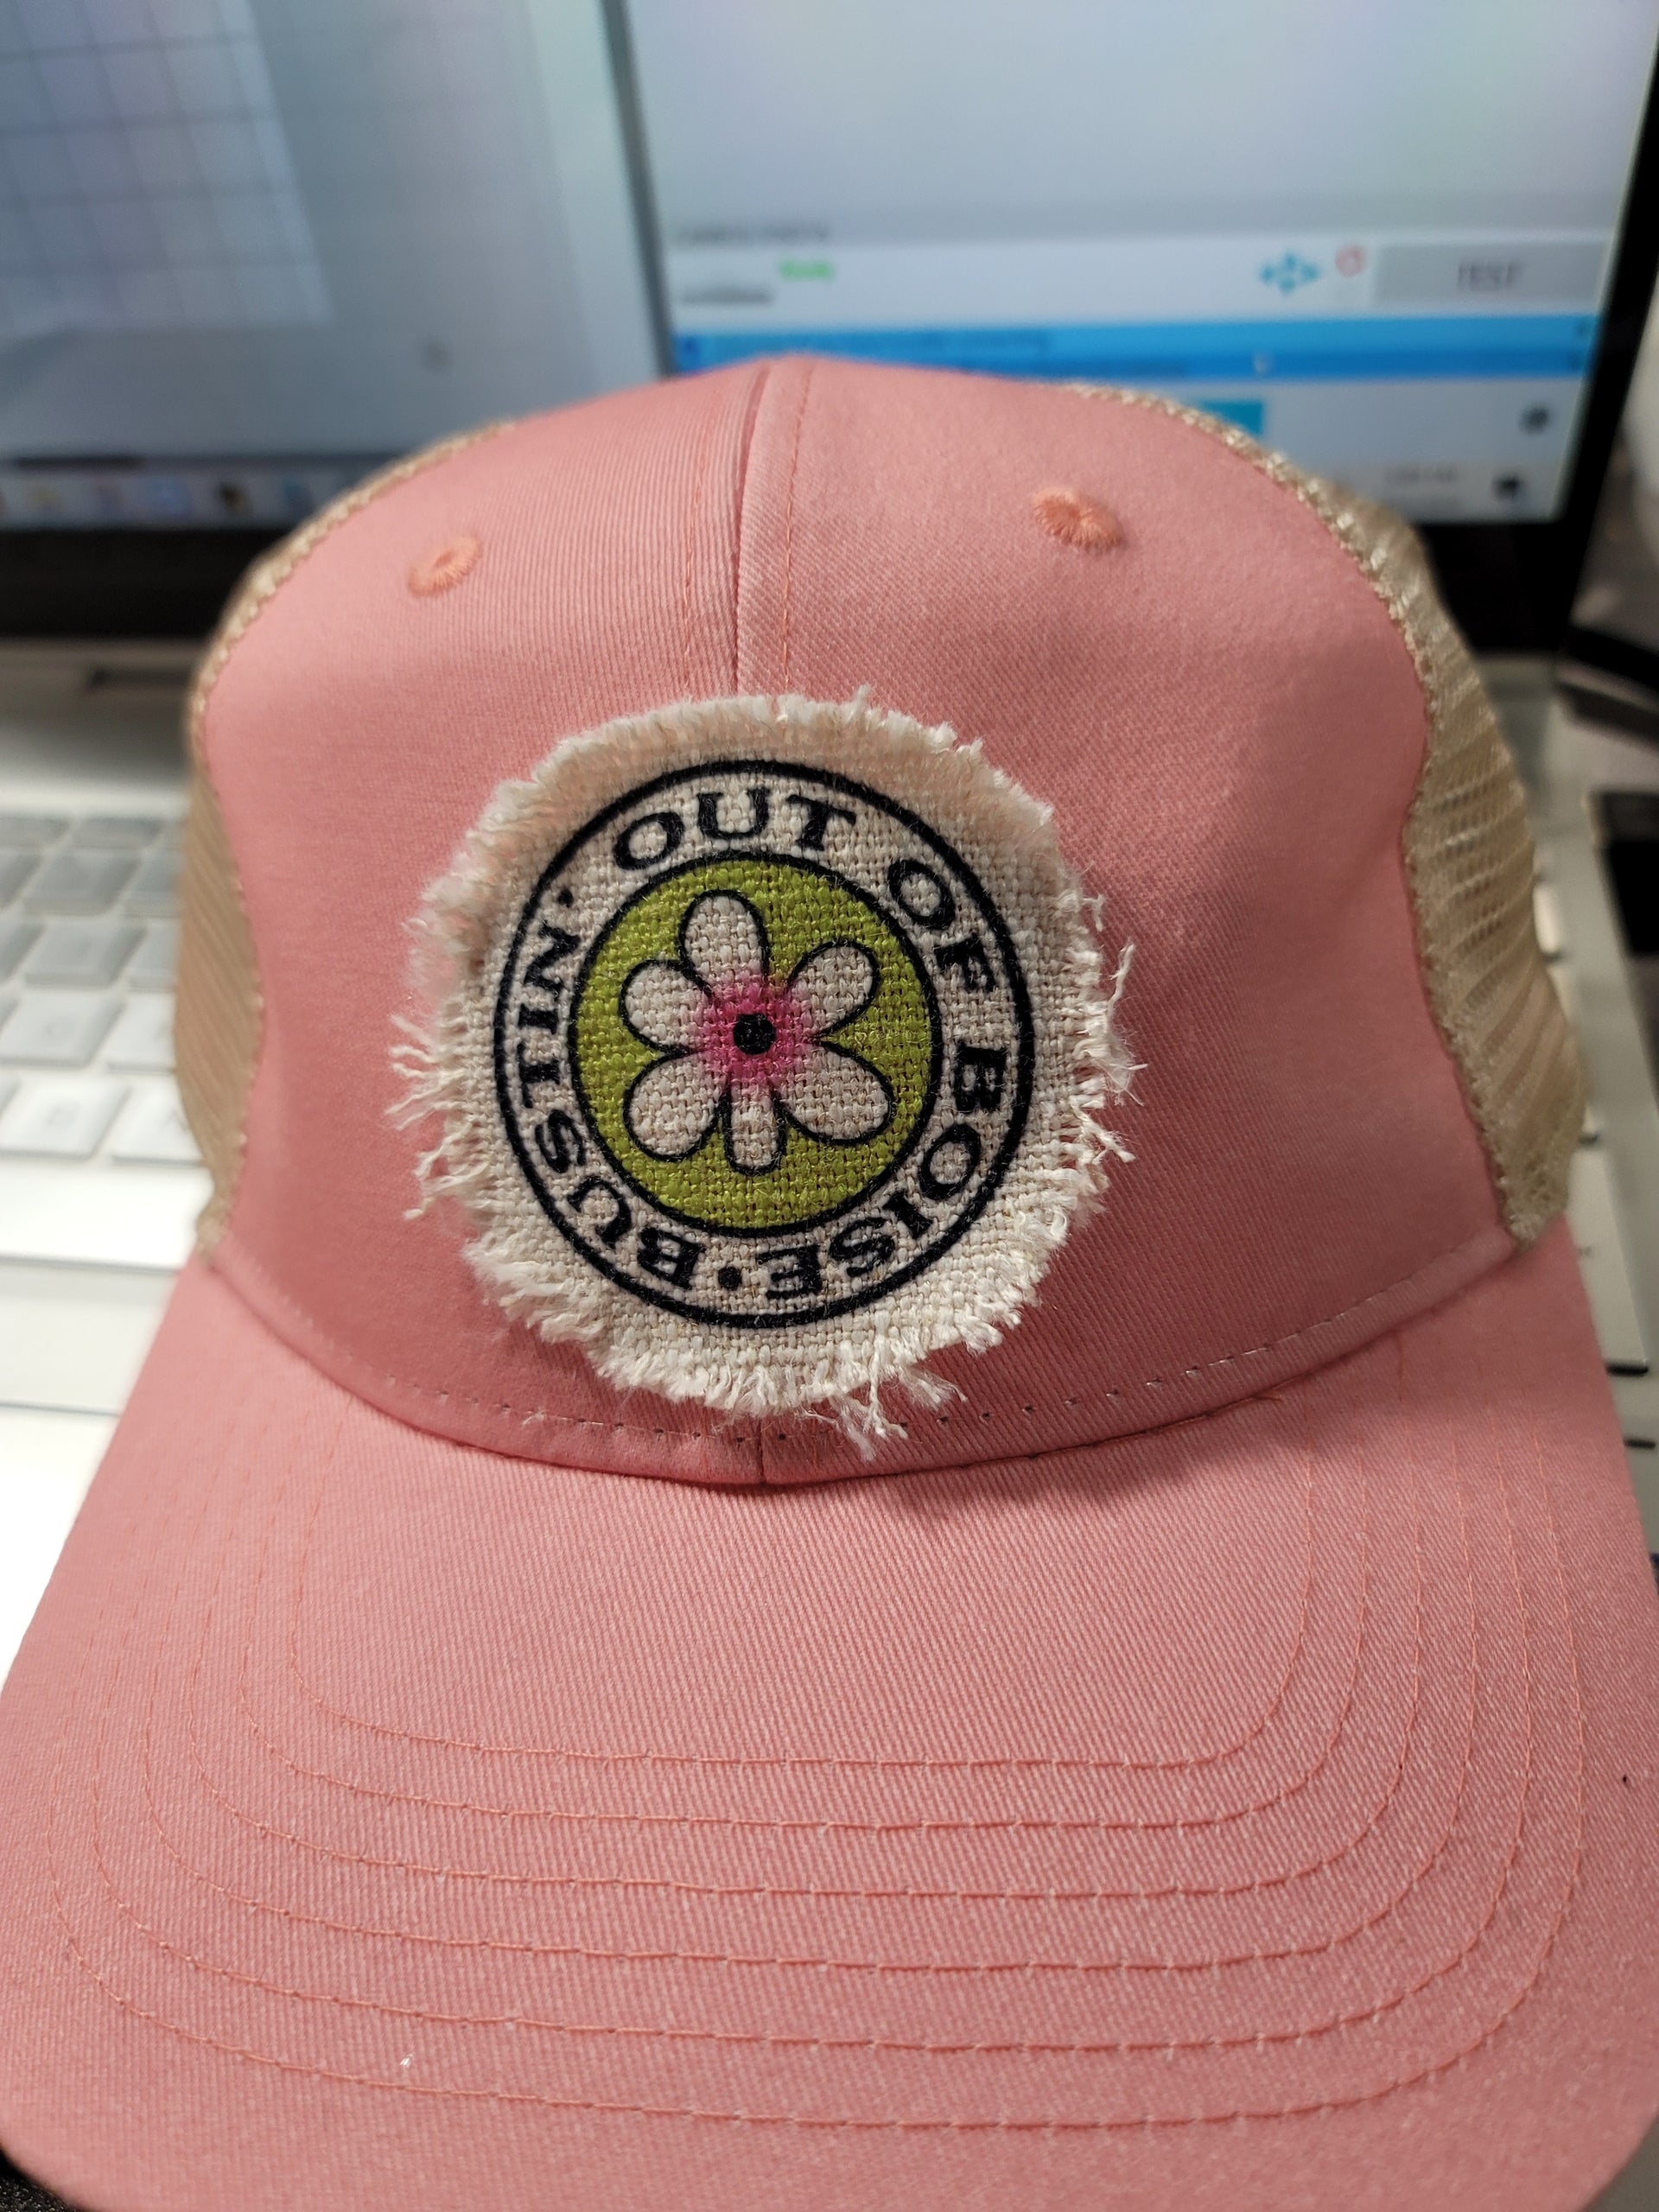 Hat patches #howto #diy #crafts #sub #sublimation #hat #patch